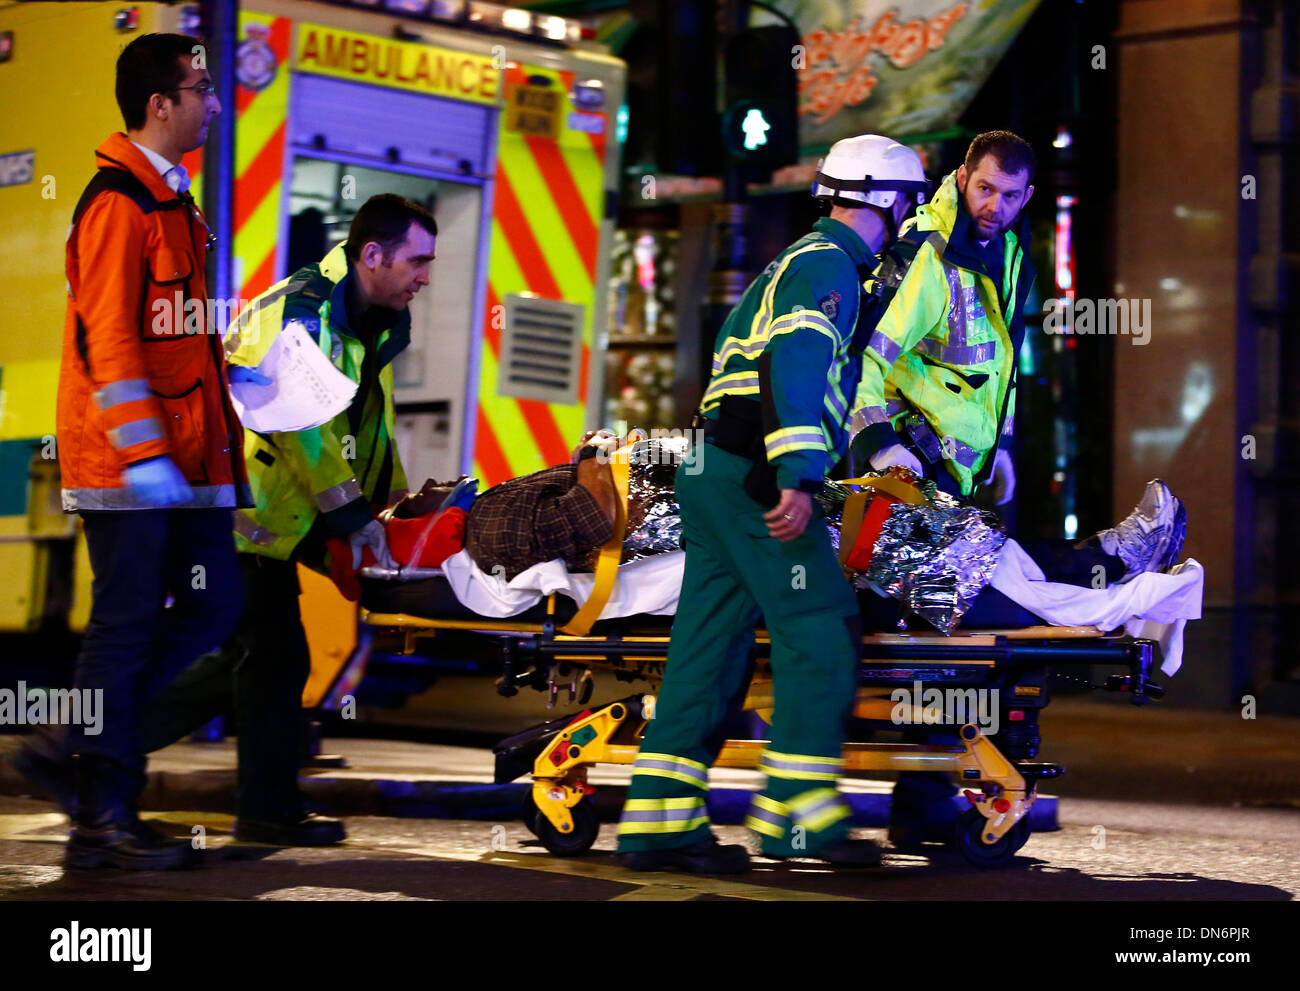 London. 19th Dec, 2013. An injured man is taken towards a waiting ambulance on a stretcher following a roof collapse at Apollo Theatre in Central London on Dec. 19, 2013. Some 88 people were injured, including 7 serious cases, after part of the roof in London's Apollo Theatre collapsed on Thursday. Credit:  Yin Gang/Xinhua/Alamy Live News Stock Photo